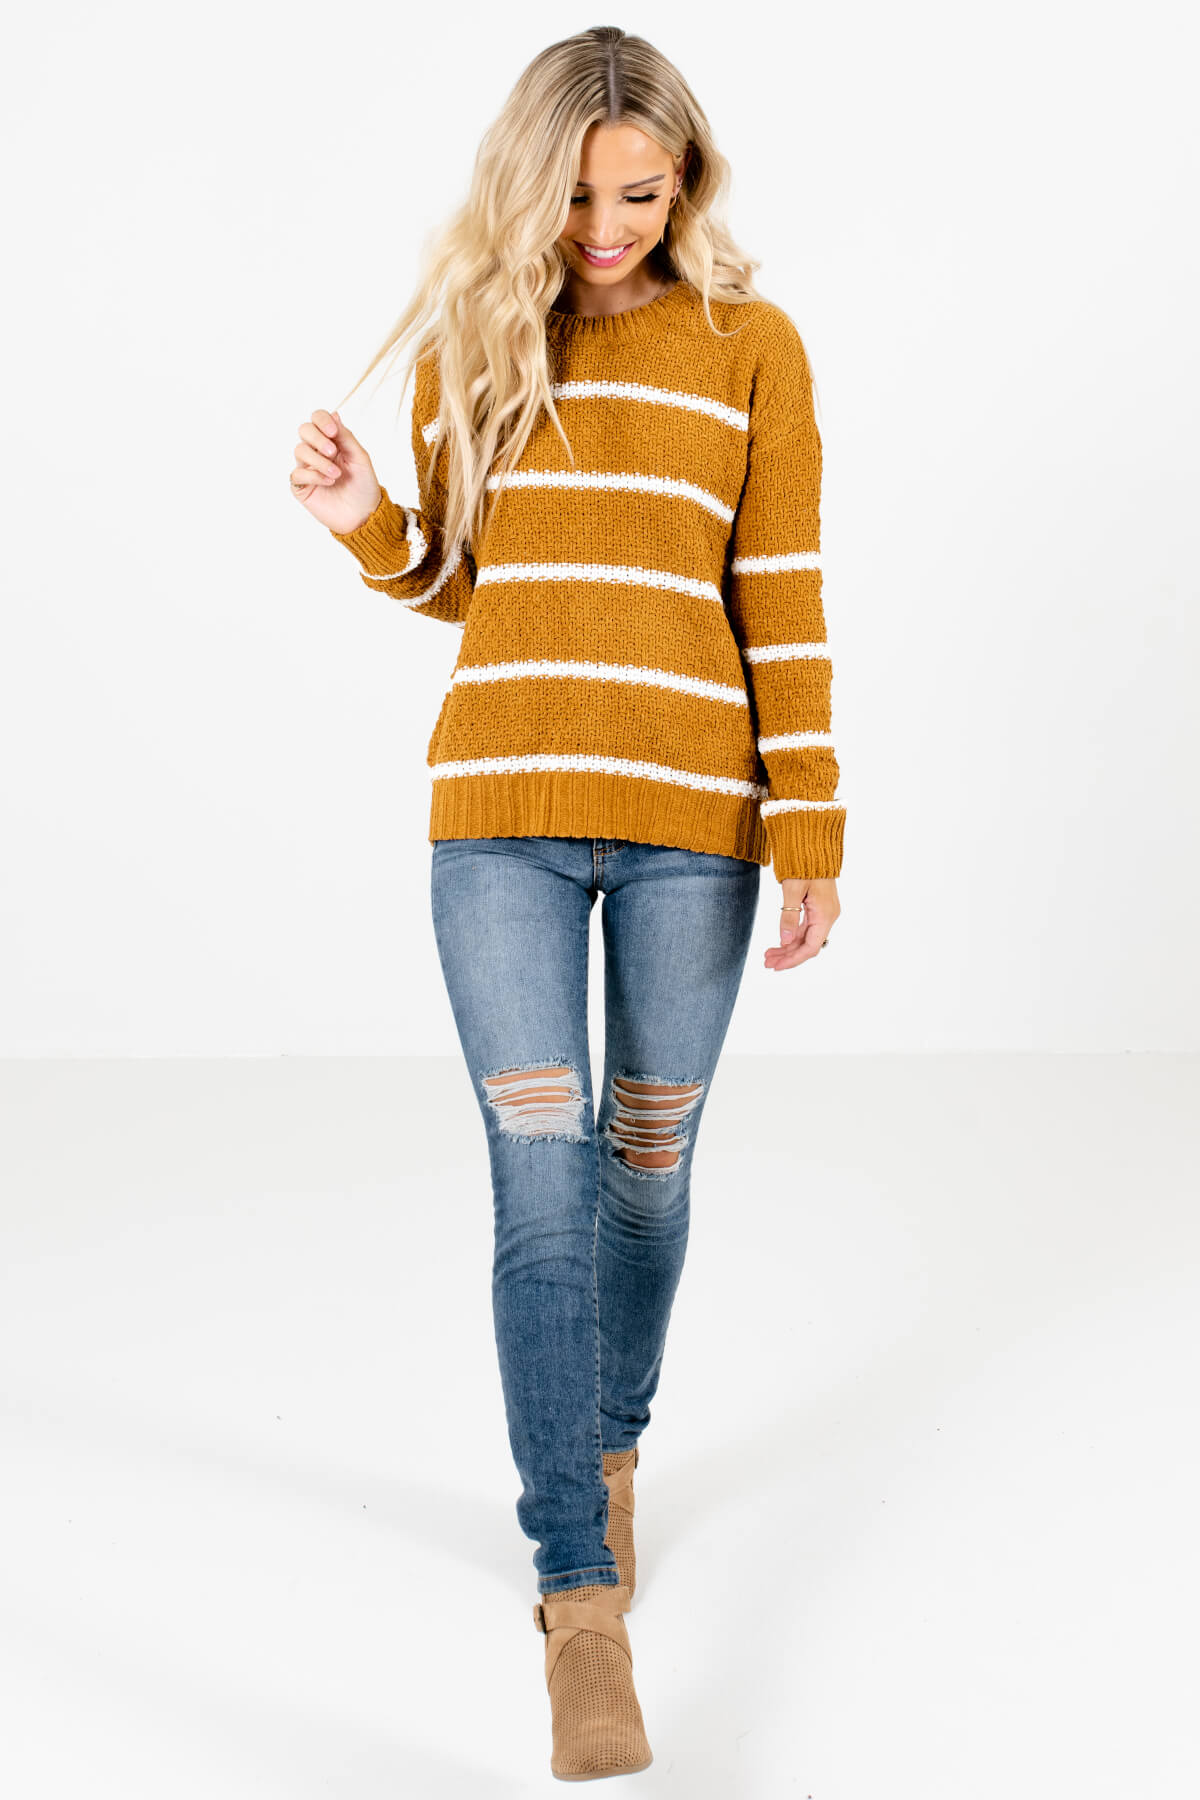 Mustard Yellow Cute and Comfortable Boutique Sweaters for Women